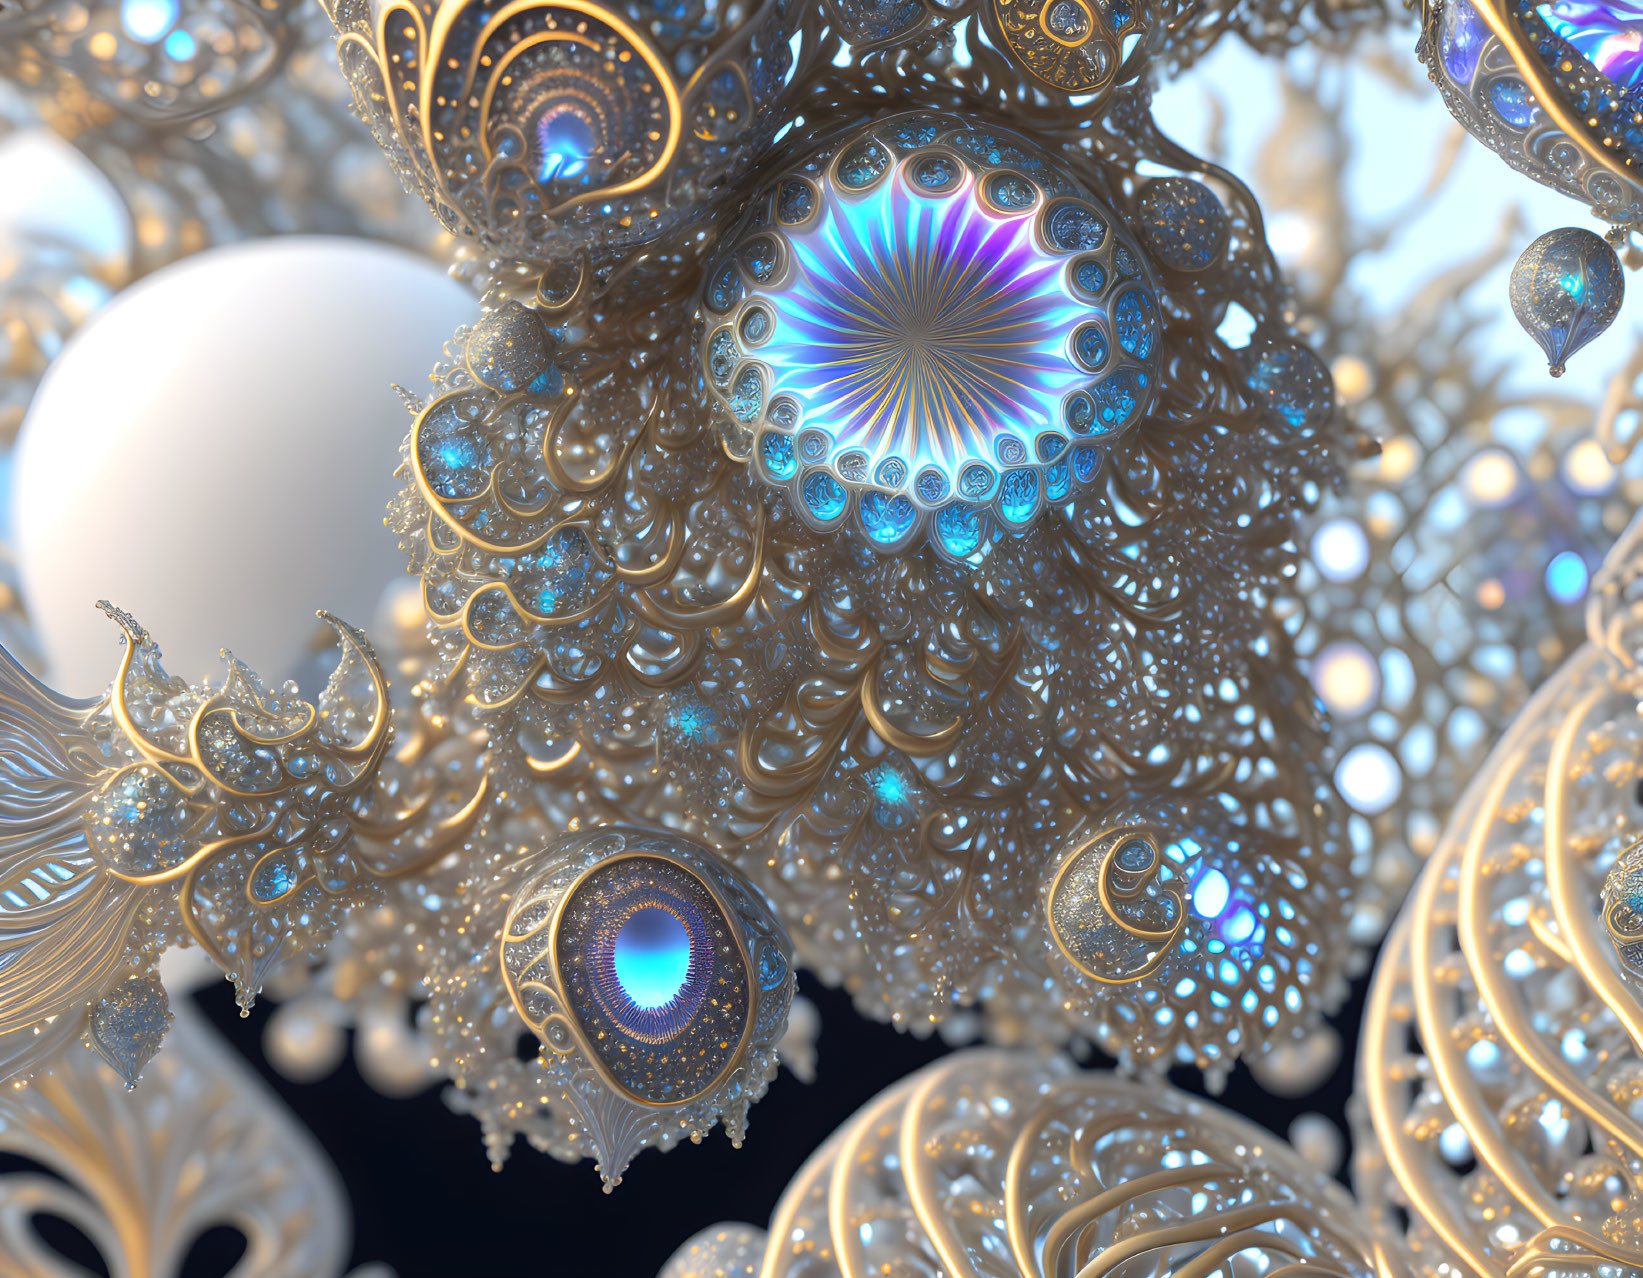 Detailed Fractal Image of Ornate Spherical Structures in Blue and Bronze Tones